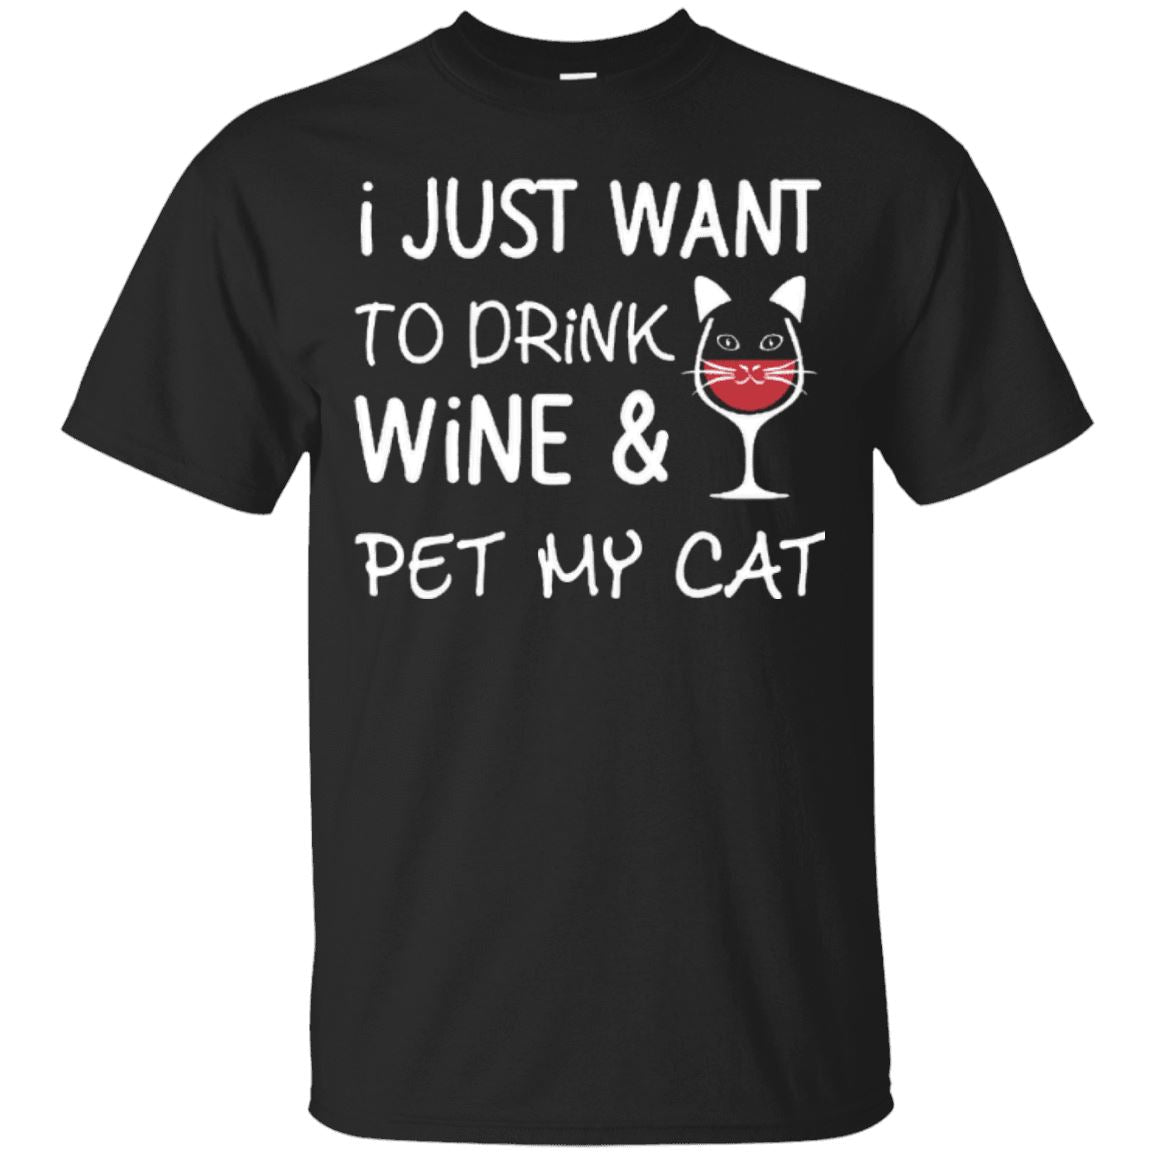 I Just Want To Drink Wine & Pet My Cat - CatsForLife